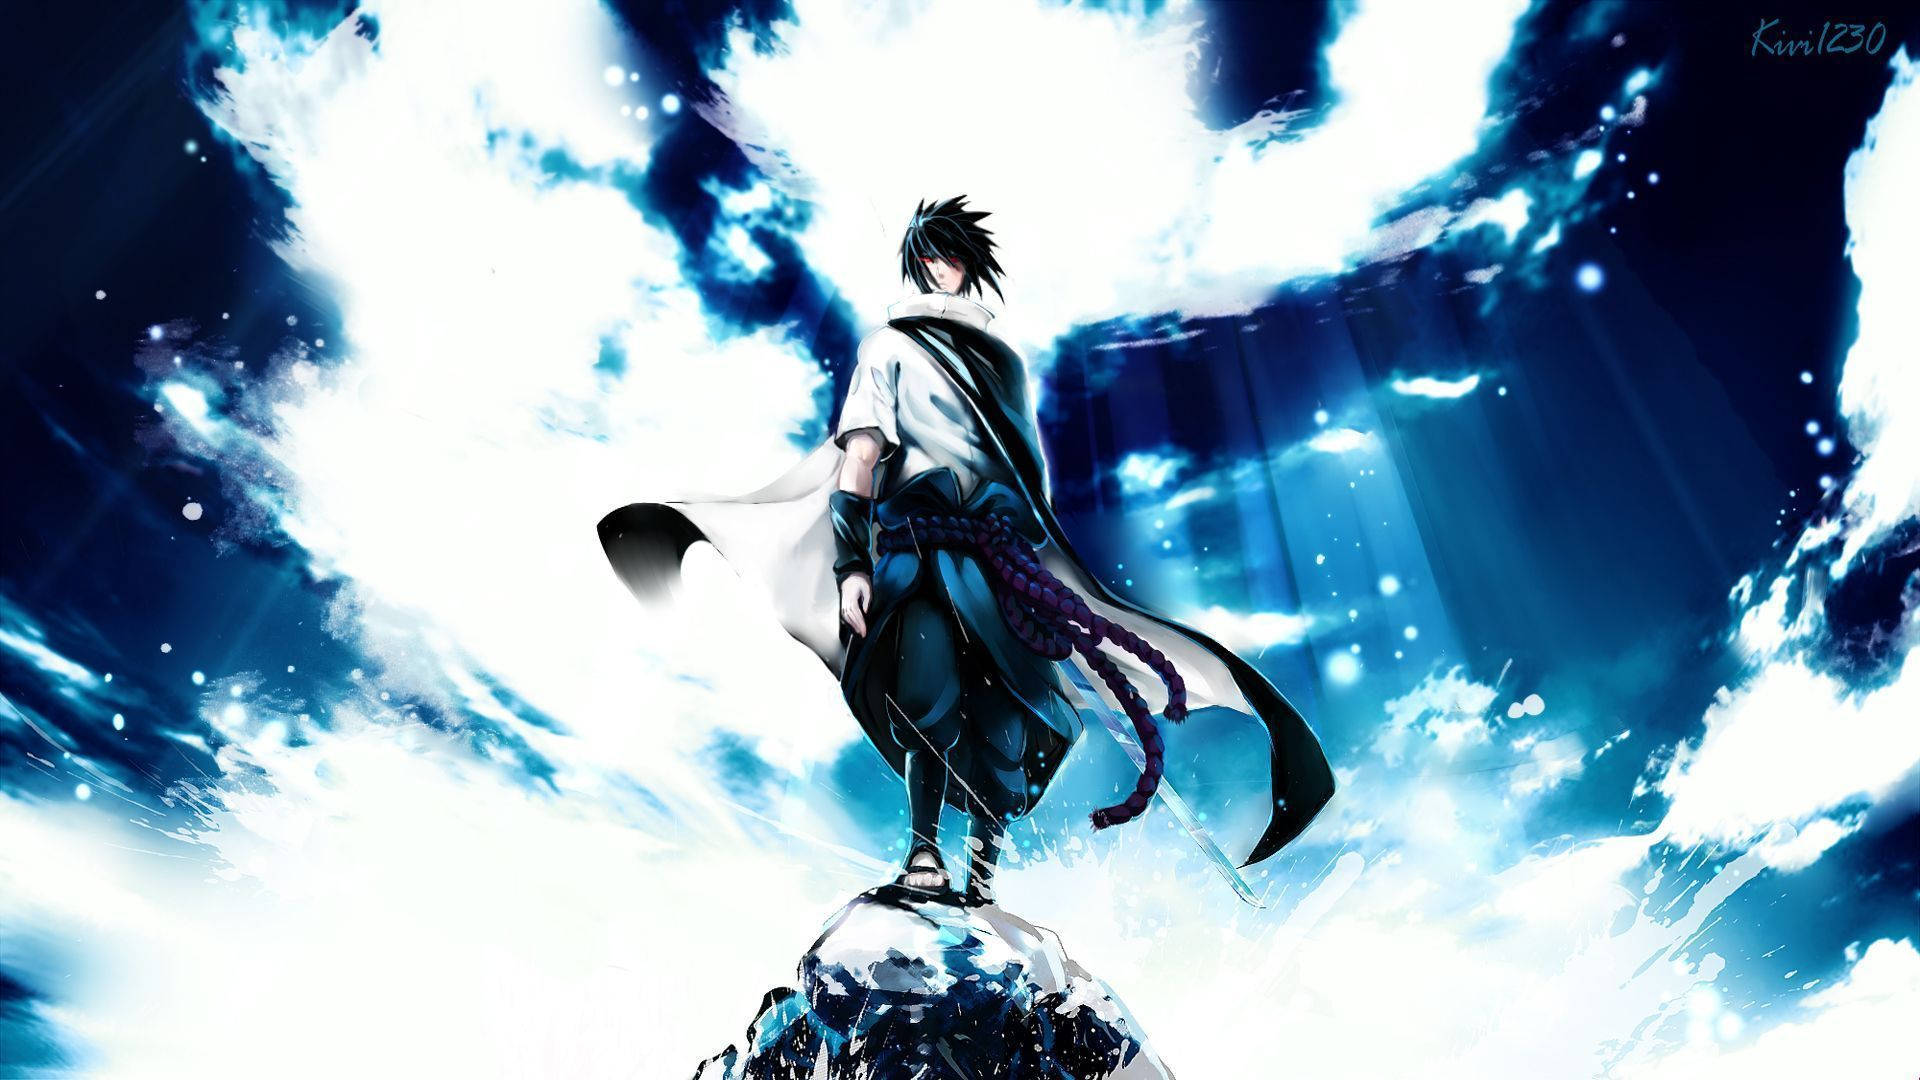 Anime boy with black spiky hair standing on top of a rock under white clouds.